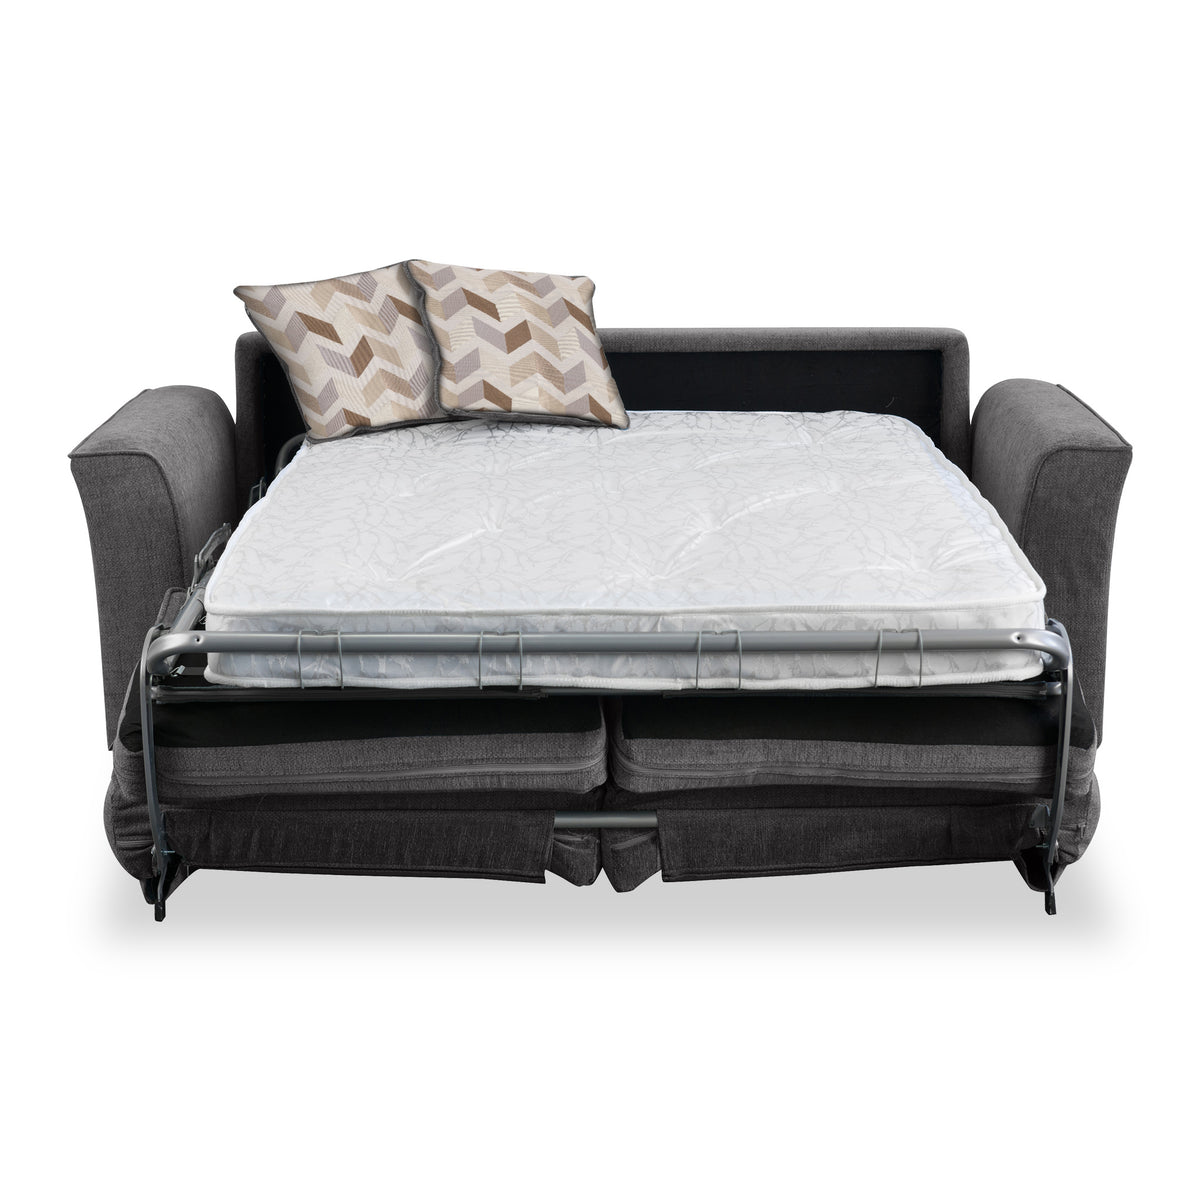 Boston 2 Seater Sofabed in Charcoal with Morelisa Oatmeal Cushions by Roseland Furniture